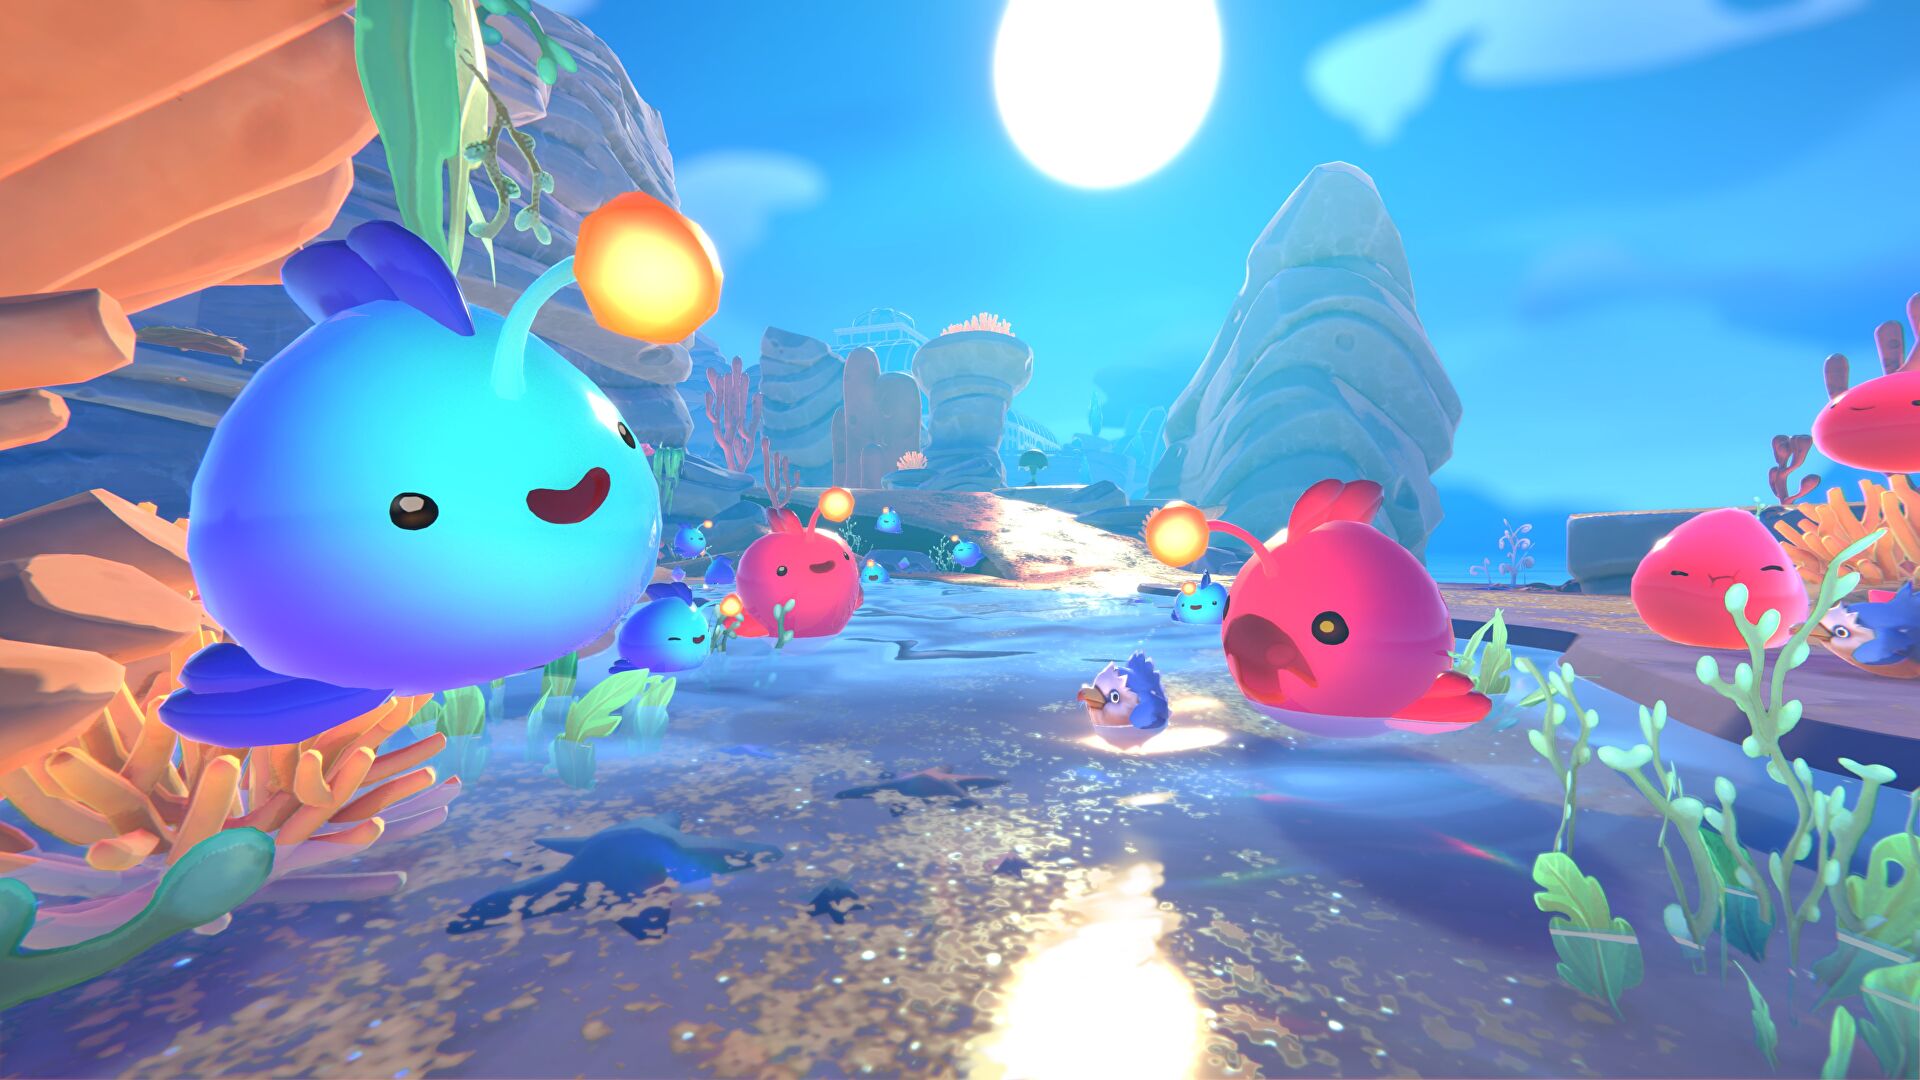 “Like a PC game that Nintendo would have made”: the making of Slime Rancher (and Slime Rancher 2)